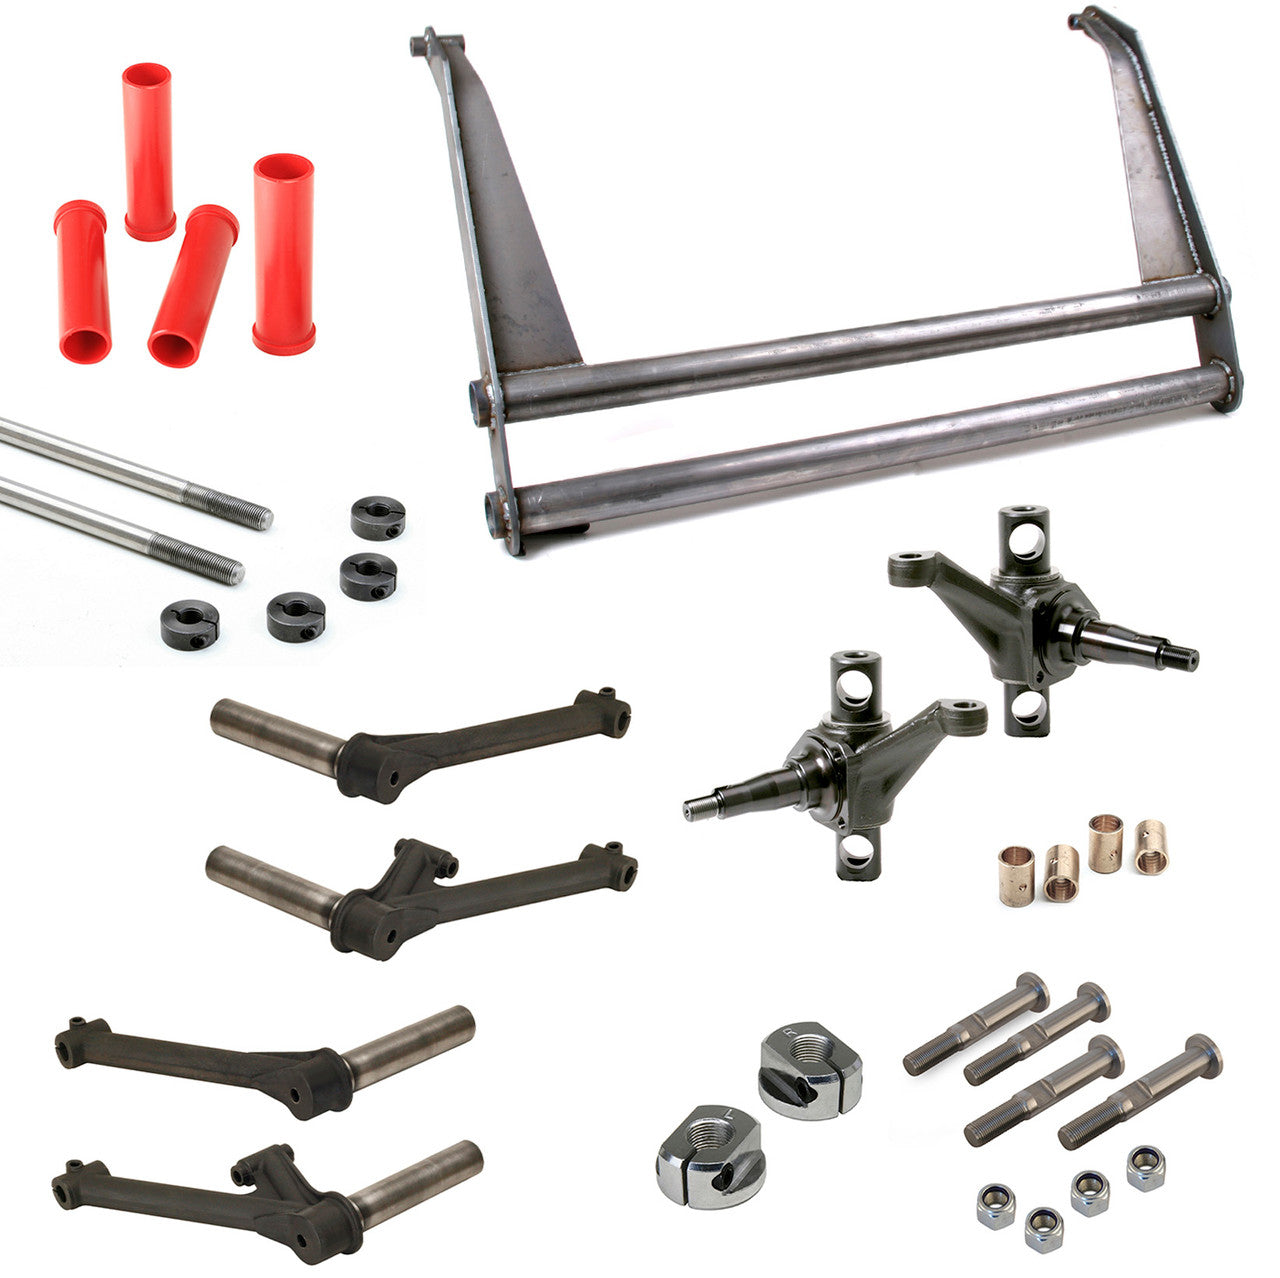 Vw Bug Suspension Kit 6" Wide Beam 10" Towers, 1-1/2X3/4 Trailing Arms Combo Spindles Heim